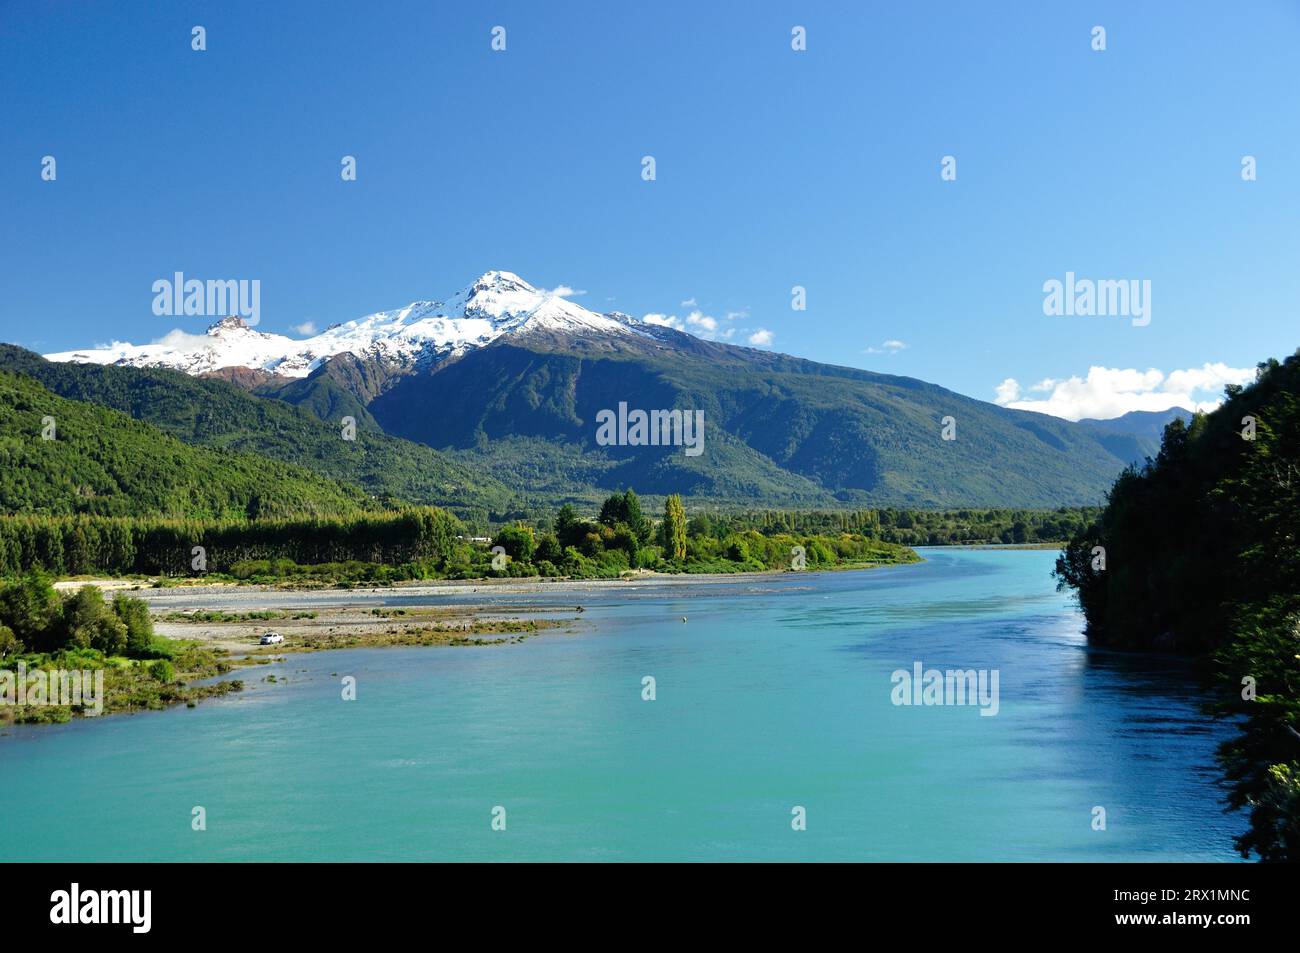 The summit of the snow-capped volcano Yate above the mouth of the Rio Puelo, Patagonia, Chile Stock Photo